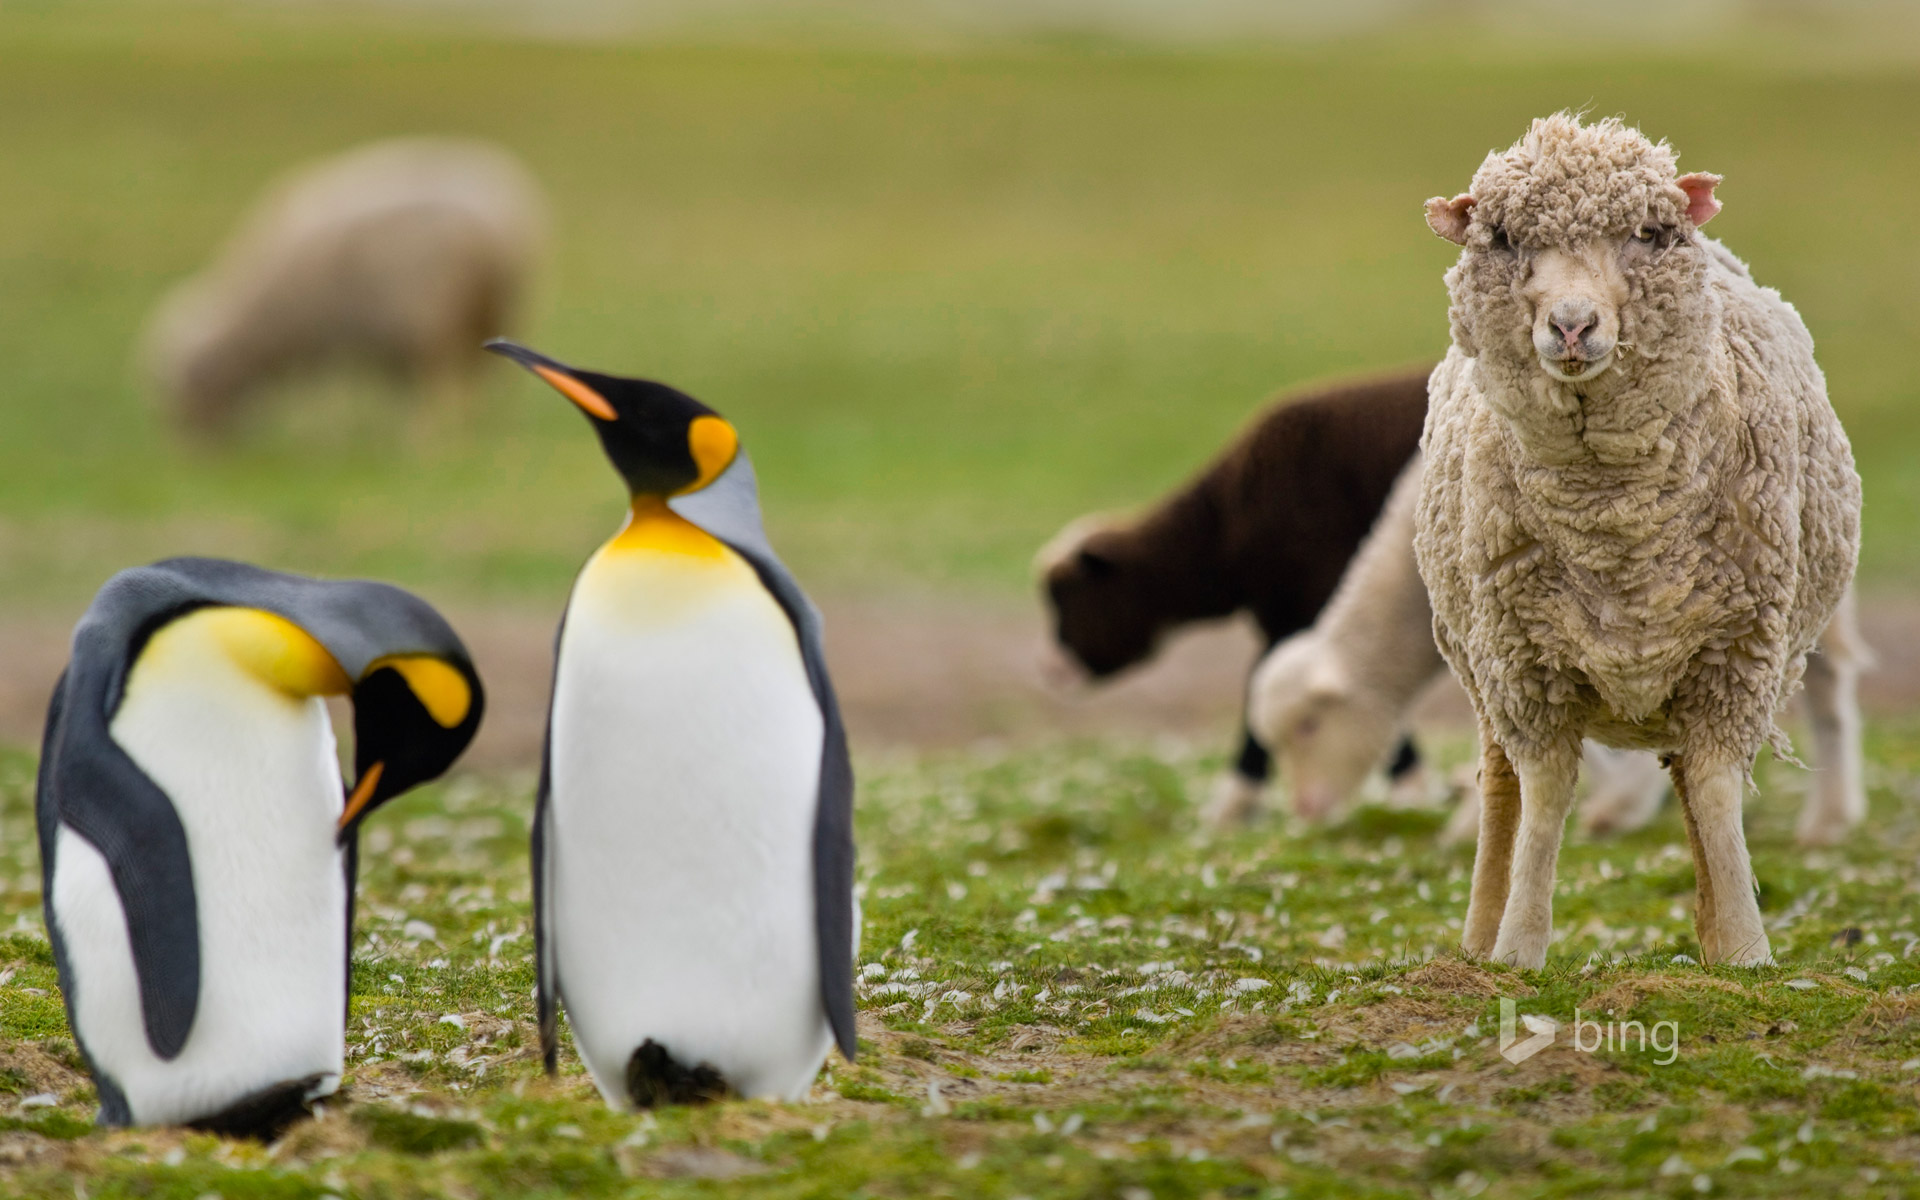 Sheep amid a king penguin colony in the Falkland Islands